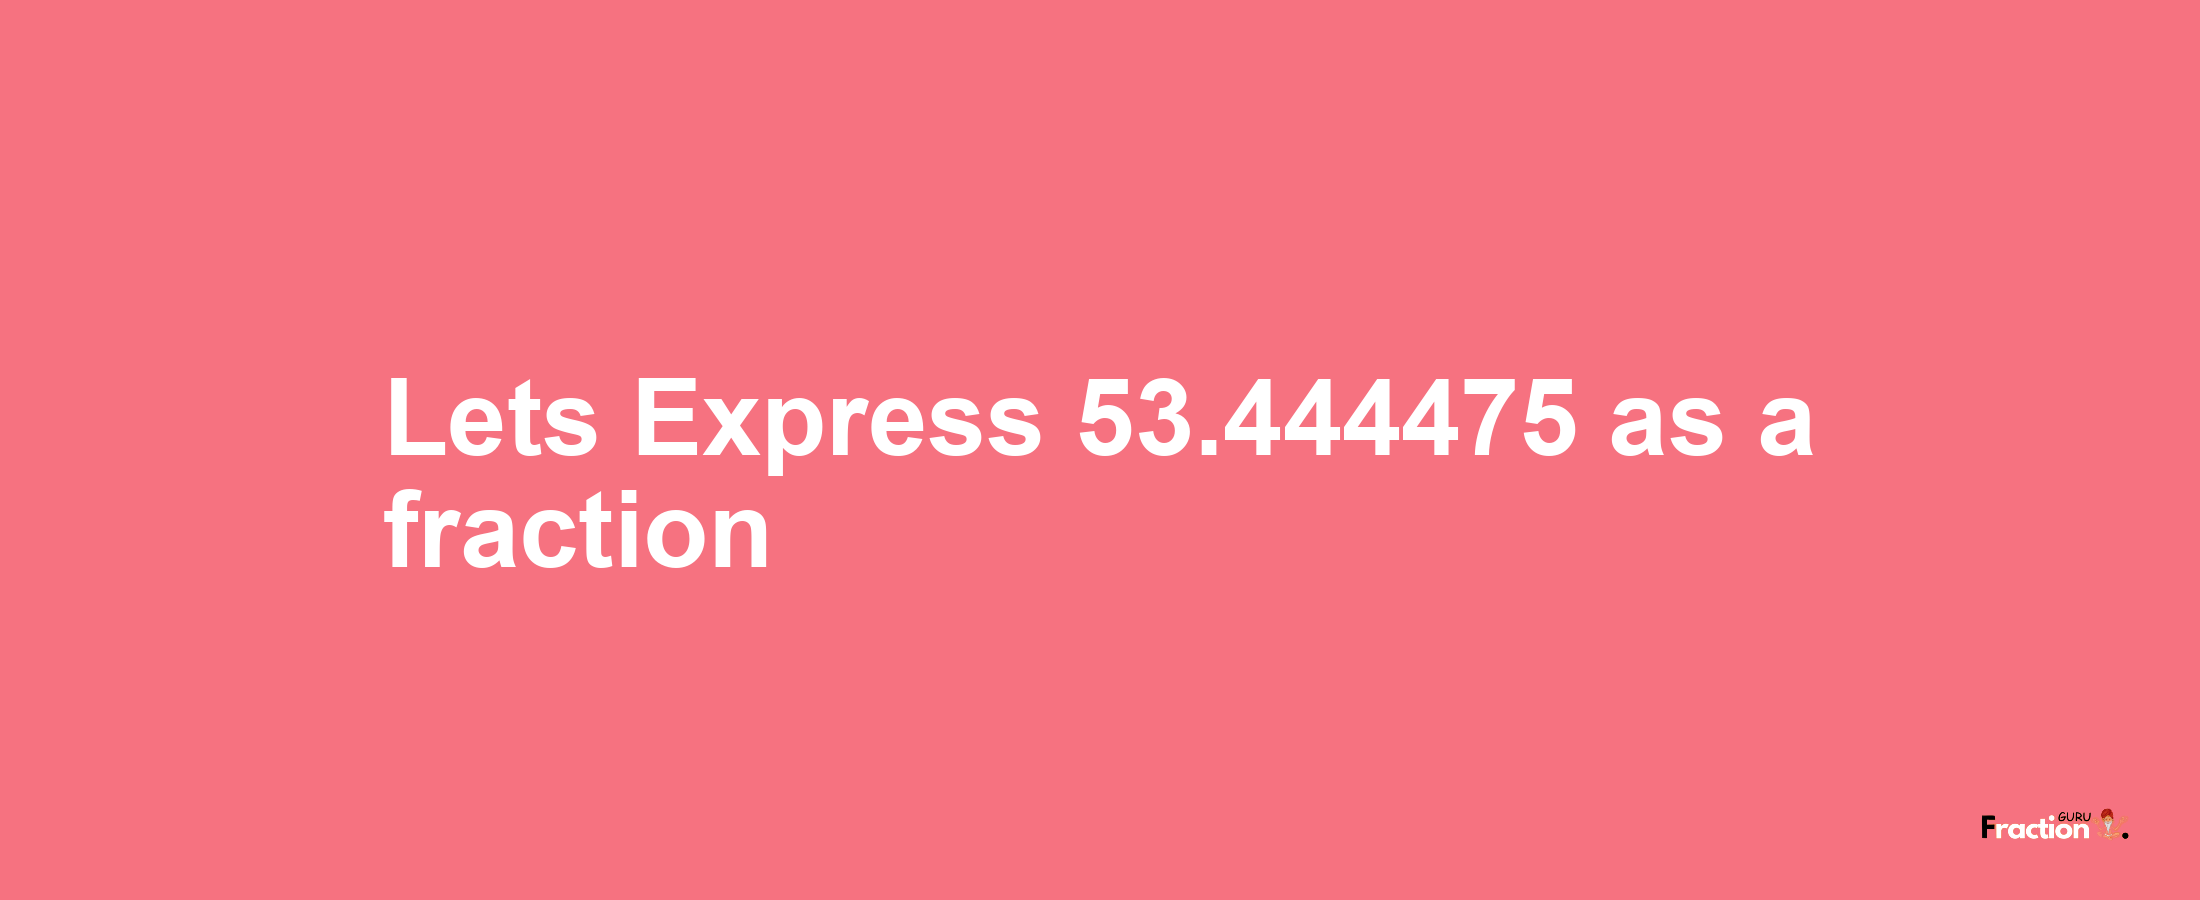 Lets Express 53.444475 as afraction